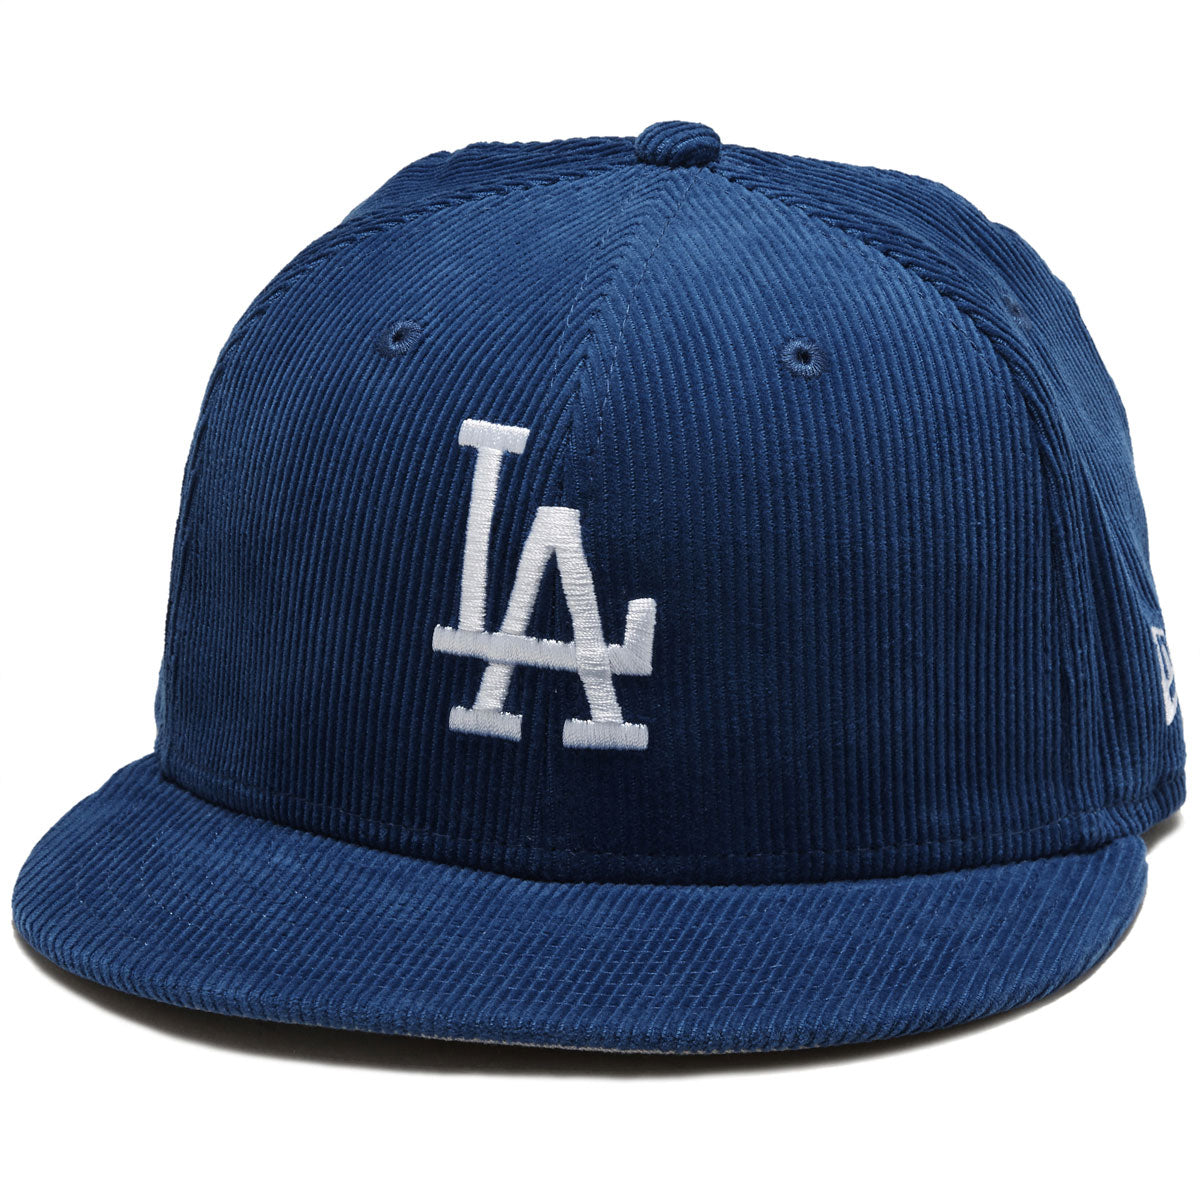 New Era Throwback Cord 17208 Los Angeles Dodgers Hat - Blue